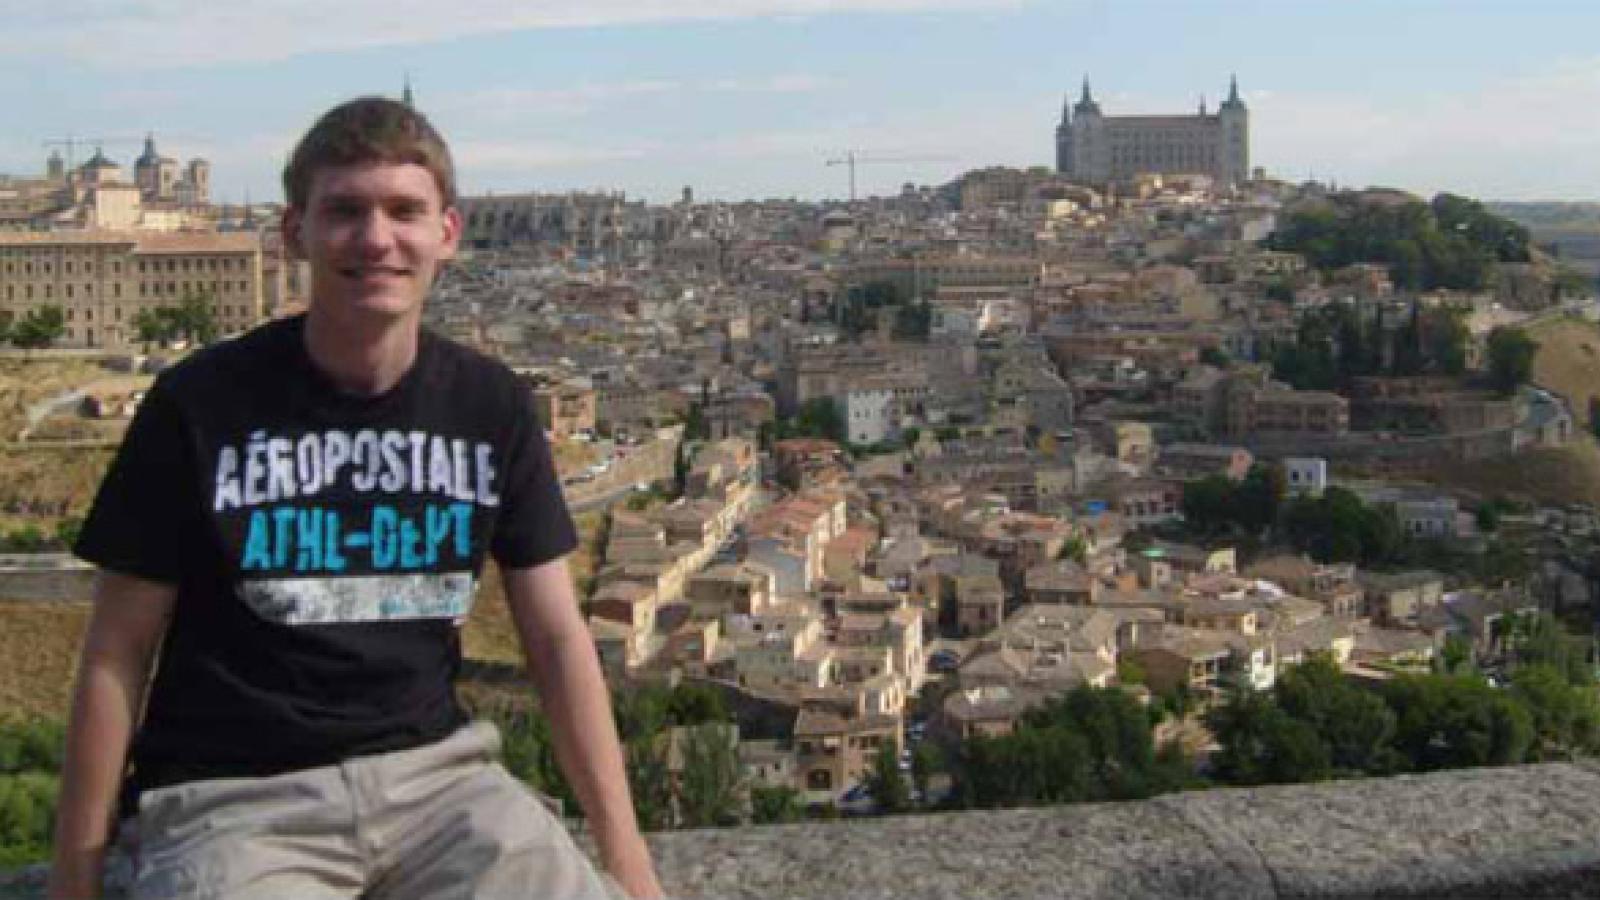 Blaise Katter conducted research in Spain for his undergraduate research project.